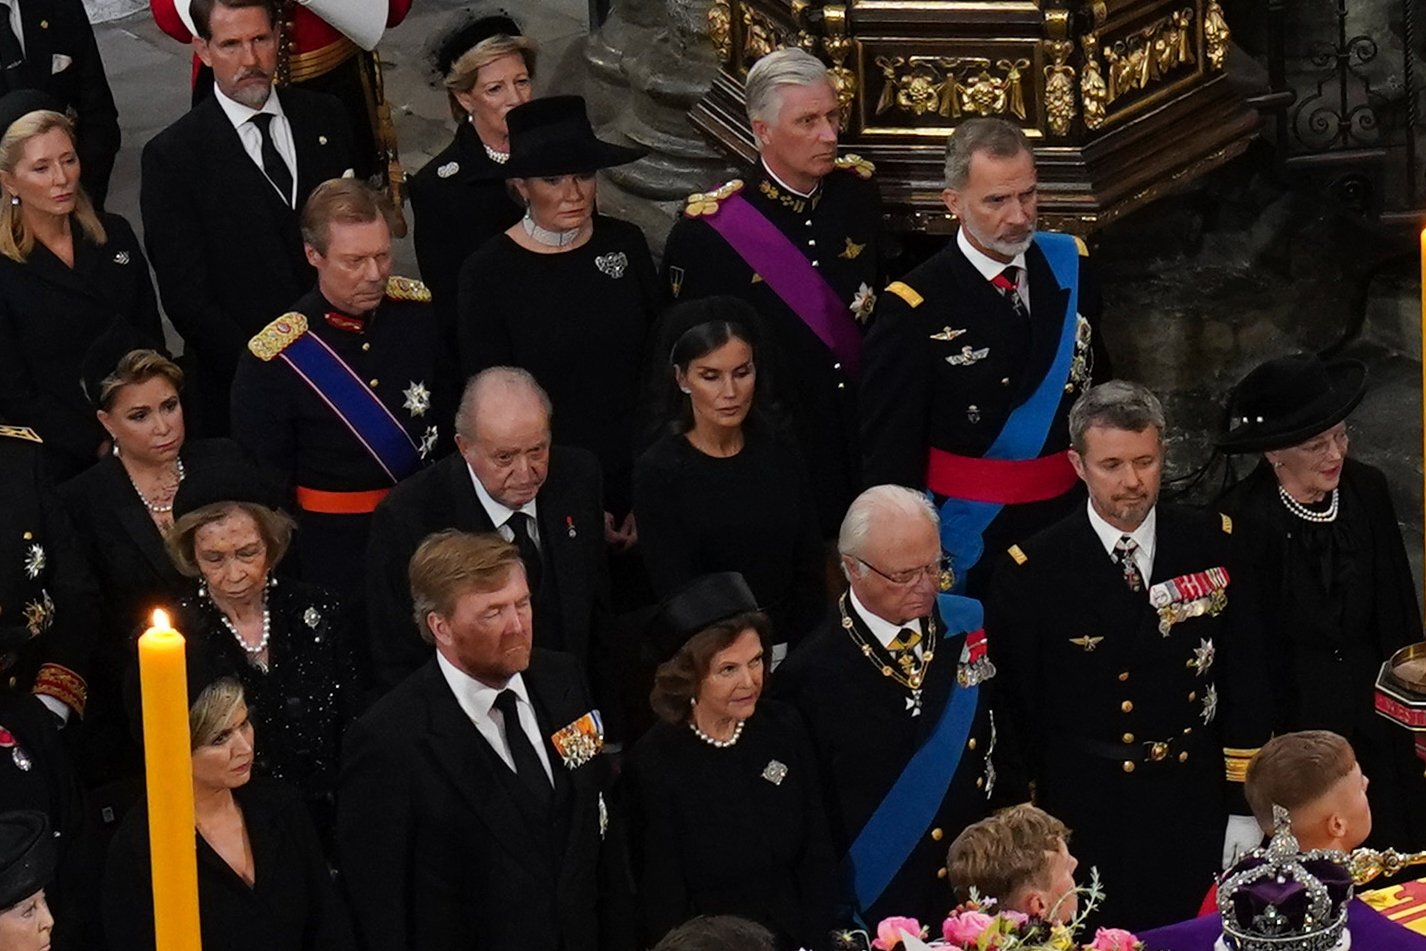 Spanish Crown and government, silent before joint photograph: "Protocol" and "personal invitation"